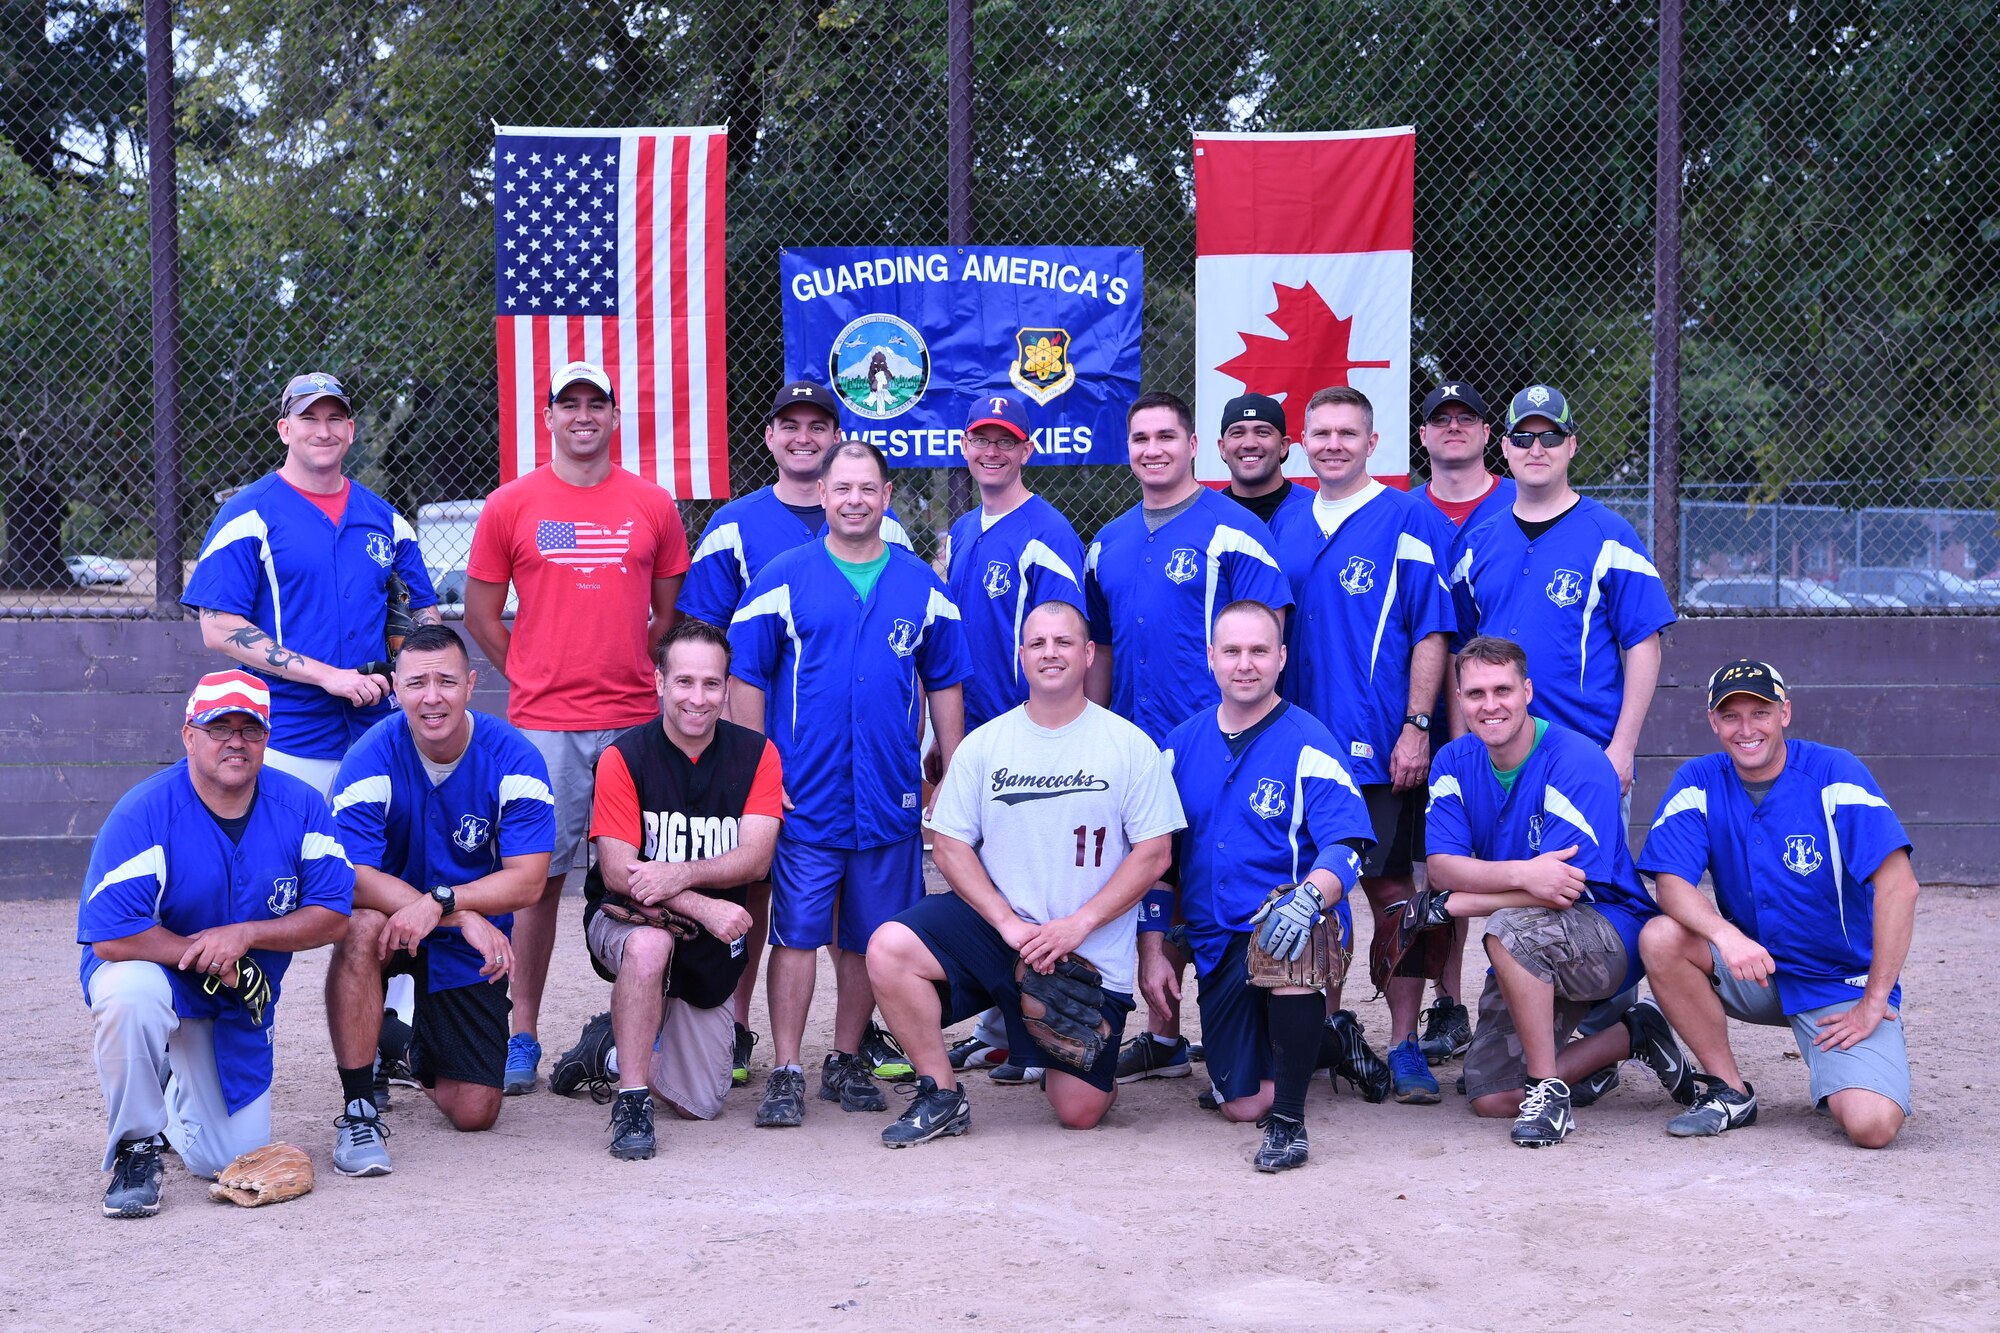 The American's softball team poses for a photo after winning the Western Air Defense Sector U.S. vs Canada Softball Challenge Cup Sept. 1 with a final score of 22 to 7.  Pictured from left to right are: (back row) Keven Blackwell, Nicholas Rhodes, Ian Crocker, Ryc Cyr, Kevin Weaver, David Bauld, Peter Hickam, Ryan McCray, and Michael Delaney.  (Front row) Carlos Gonzales, Allan Lawson, Joseph Landis, Daniel Rebstock, David Quelland, Robert Staszek, Michael Doing, and Jason Weczorek. (U.S. Air National Guard photo by Capt. Kimberly D. Burke)